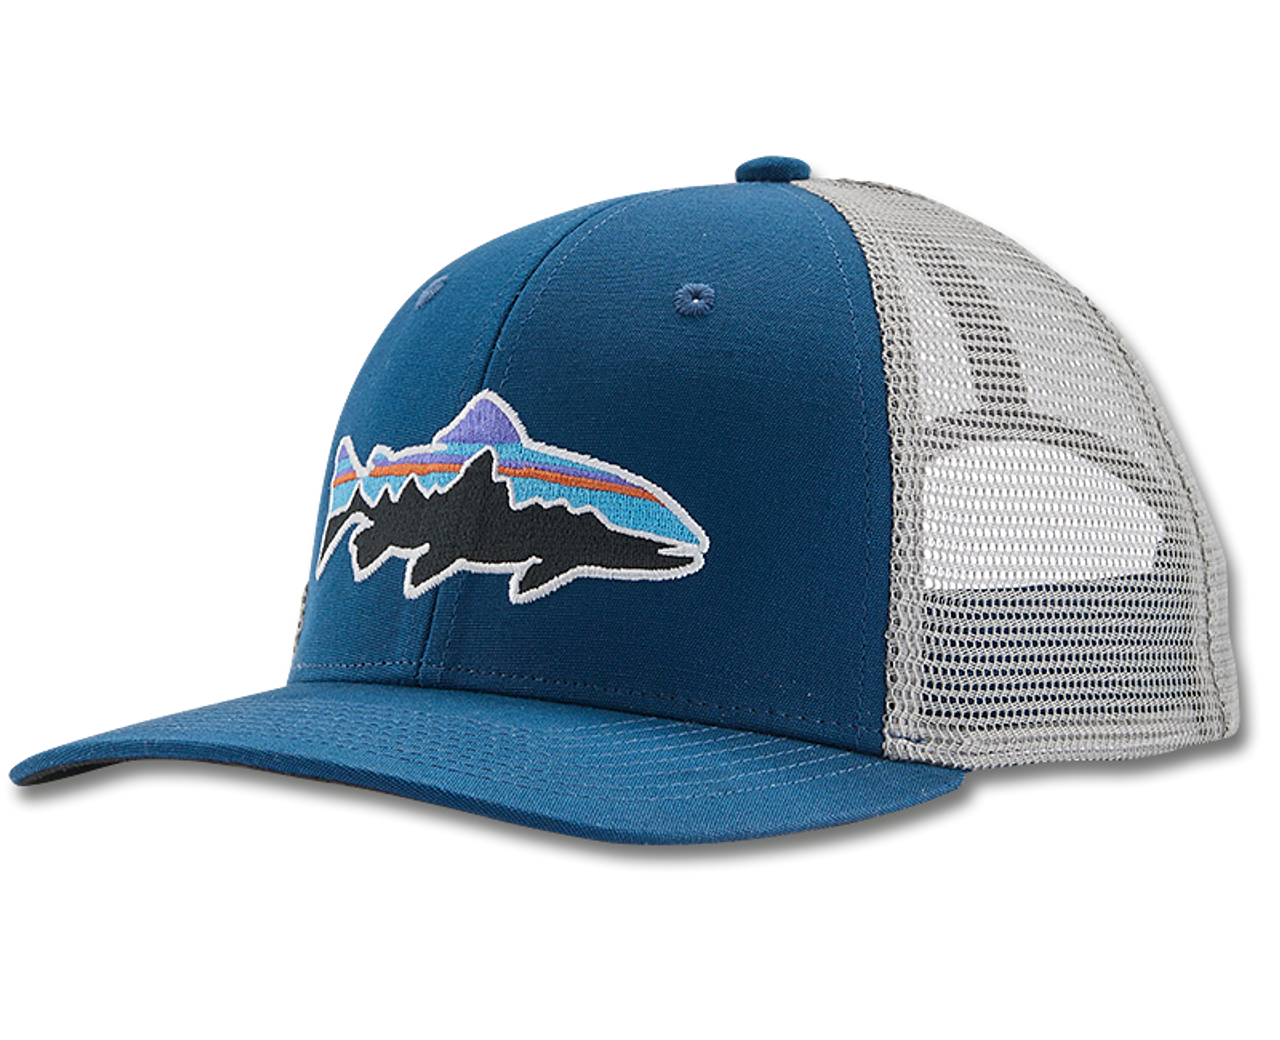 Patagonia Fitz Roy Trout Trucker Hat - Sunrise Fly Shop